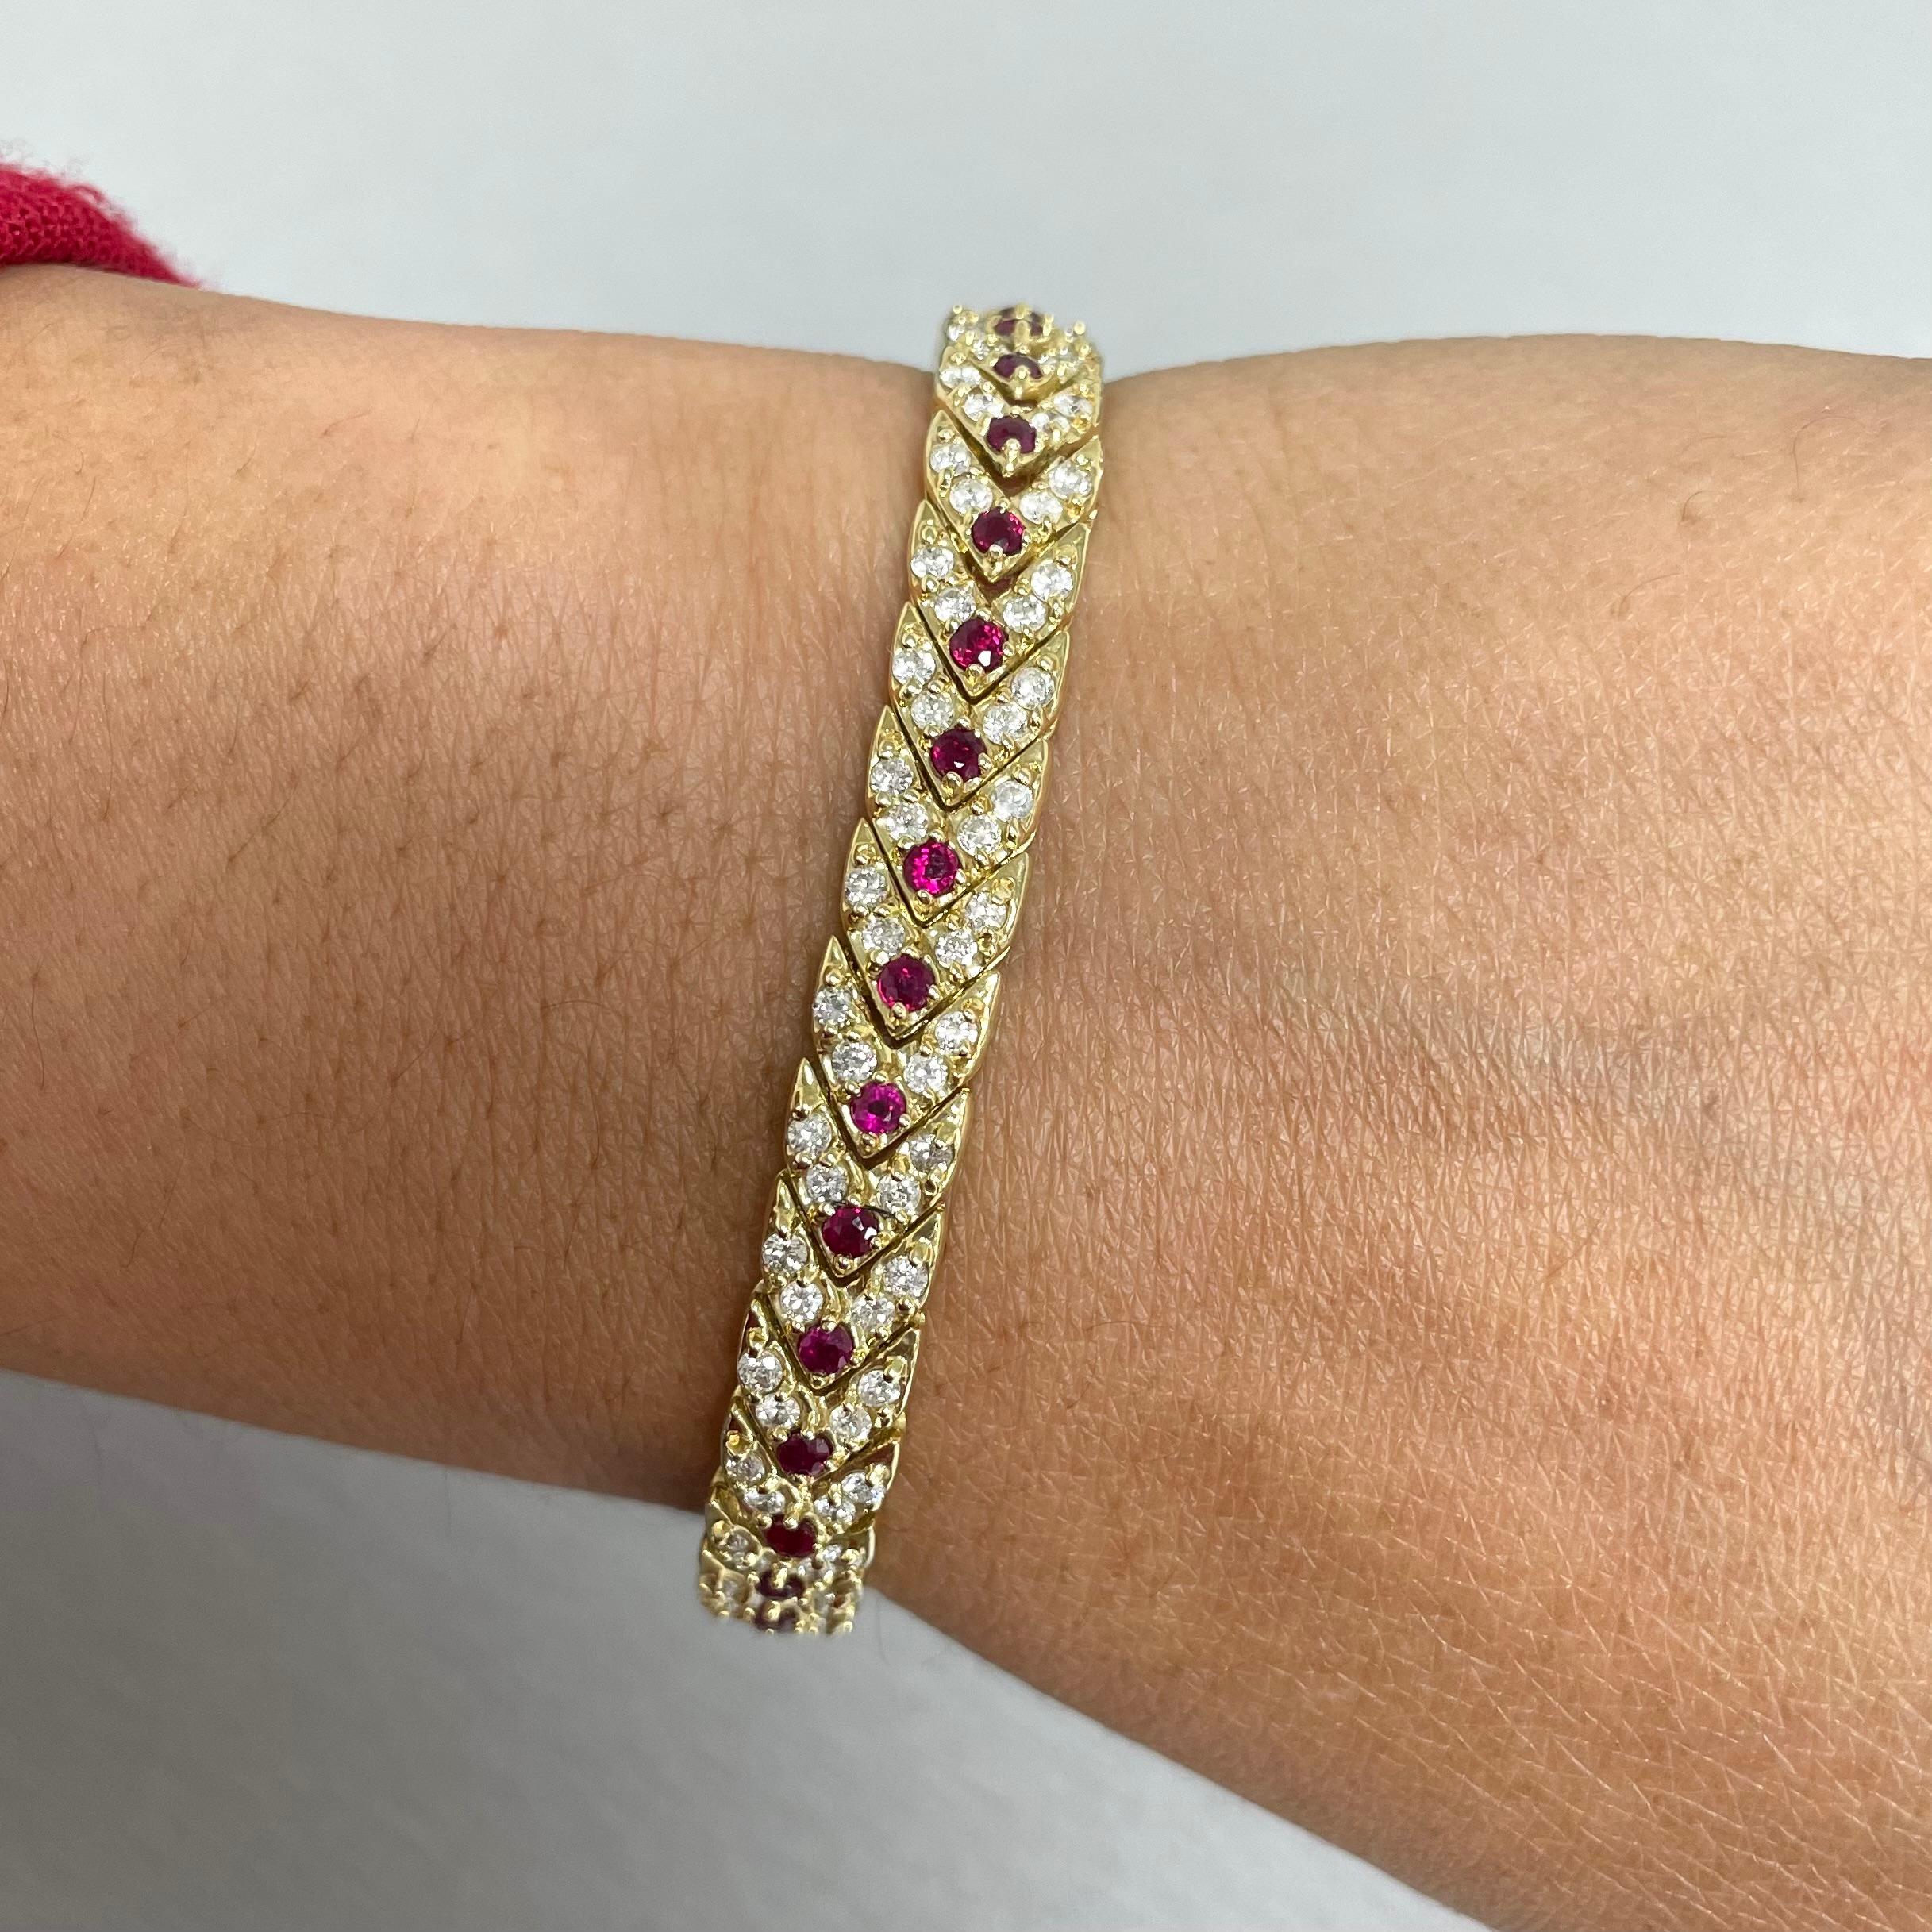 Traditional yet modern, this bracelet adds an elegant touch of color whether one is dressing casual or fancy. 

Gemstones Type: Ruby 
Gemstones Shape: Round 
Gemstones Weight: 1.10 ct 
Gemstones Color: Red 

Total Diamond Weight: 3.28 ct 
Diamond